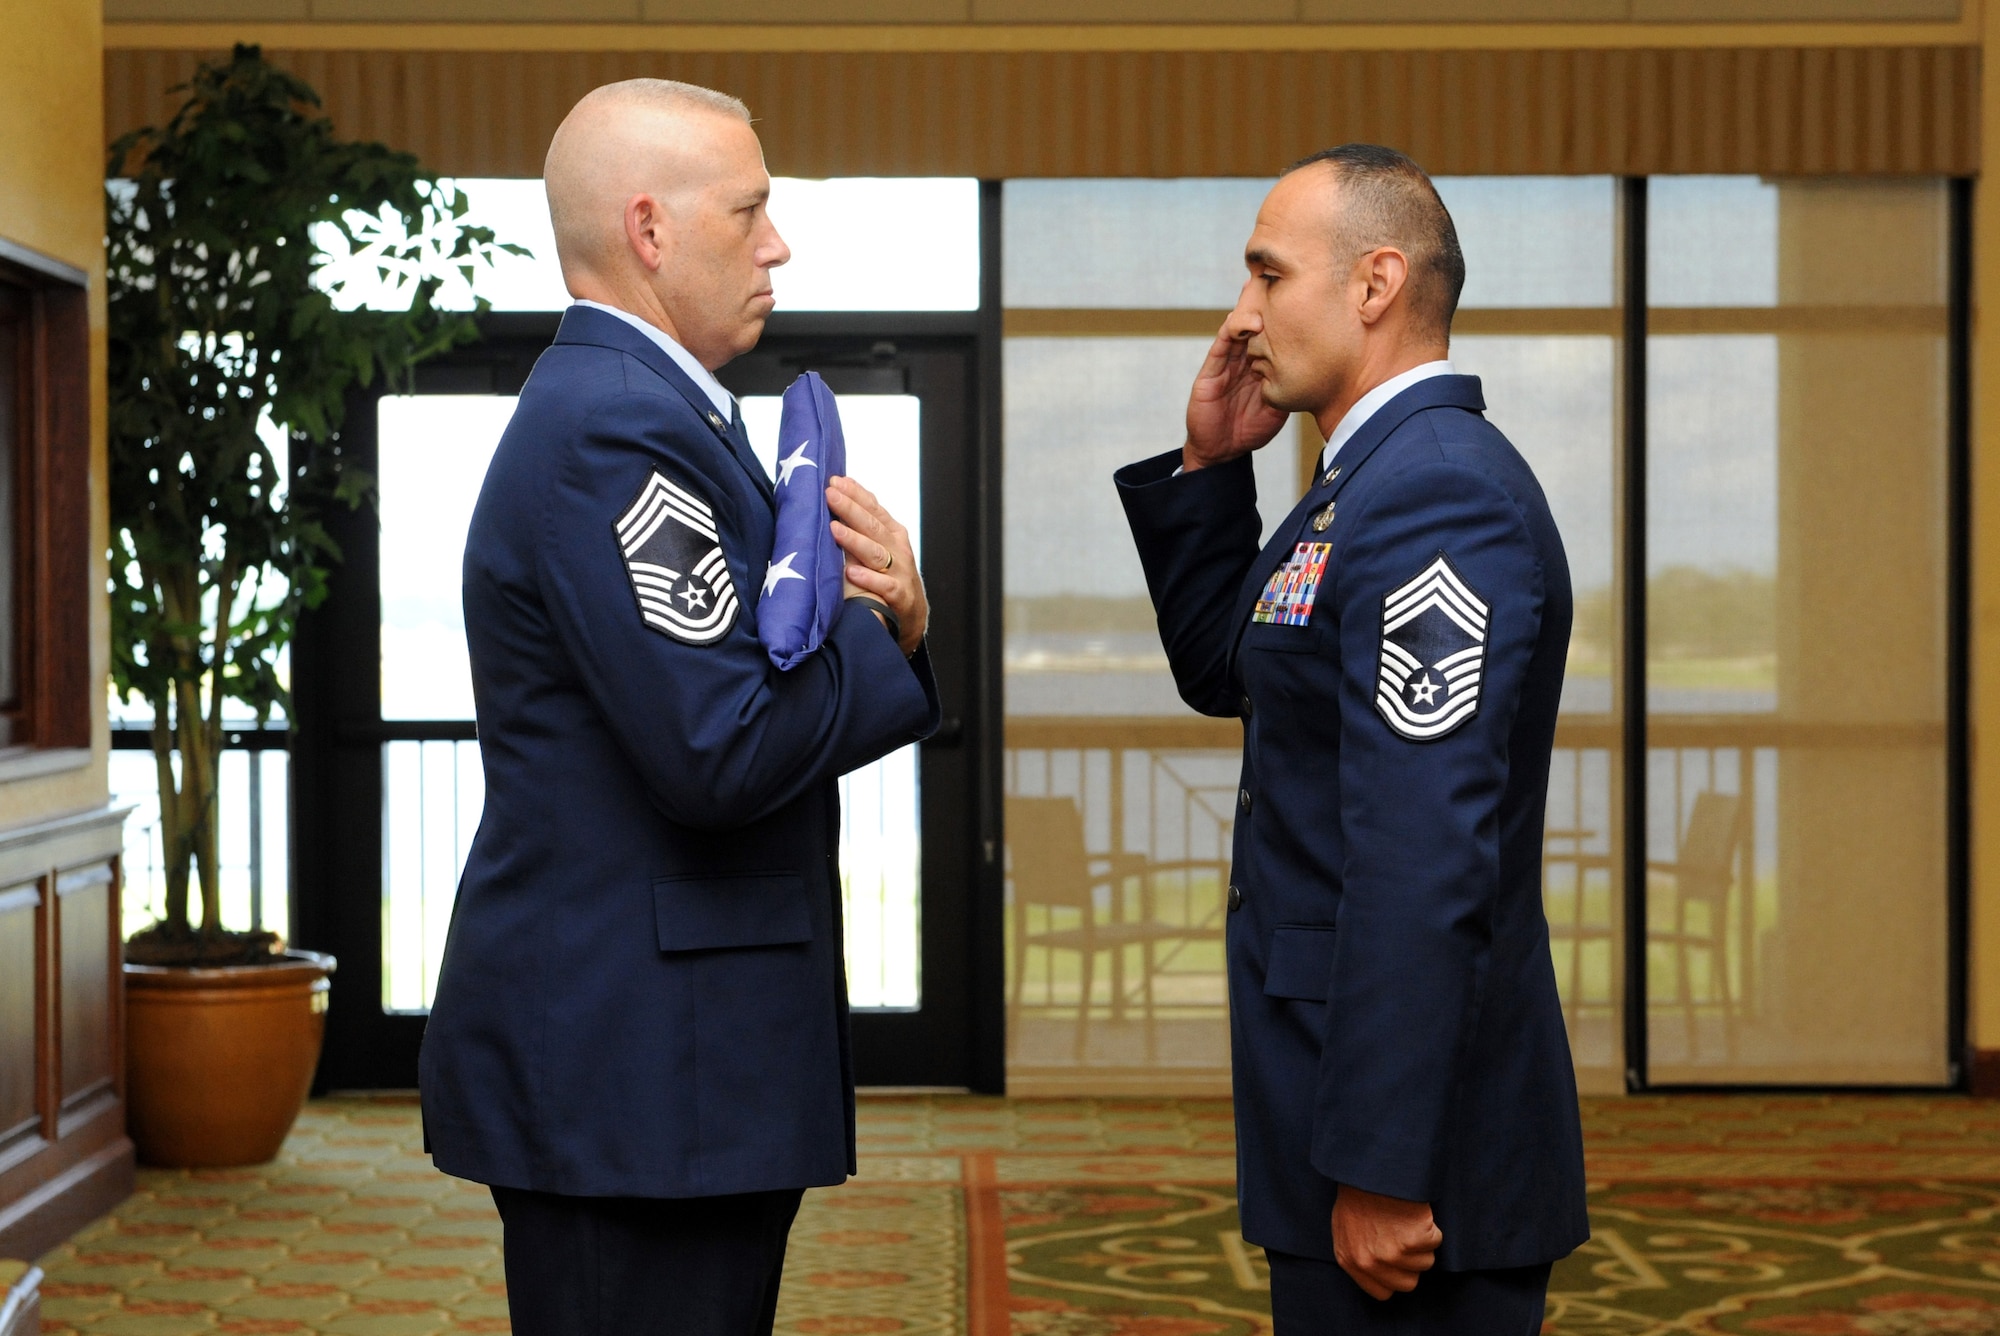 Chief Master Sgt. Robert Winters, 81st Training Group superintendent, is presented the U.S. flag by Chief Master Sgt. Reynaldo Garza, Jr., 85th Engineering Installation Squadron chief enlisted manager, during his retirement ceremony at the Bay Breeze Event Center Sept. 8, 2016, on Keesler Air Force Base, Miss. Winters retired with more than 29 years of military service and served multiple assignments in California, Louisiana, Georgia, Colorado, Korea, and the United Kingdom. He also worked as an electronic warfare officer in support of more than over 700 soldiers in multiple locations throughout Iraq. (U.S. Air Force photo by Kemberly Groue/Released)